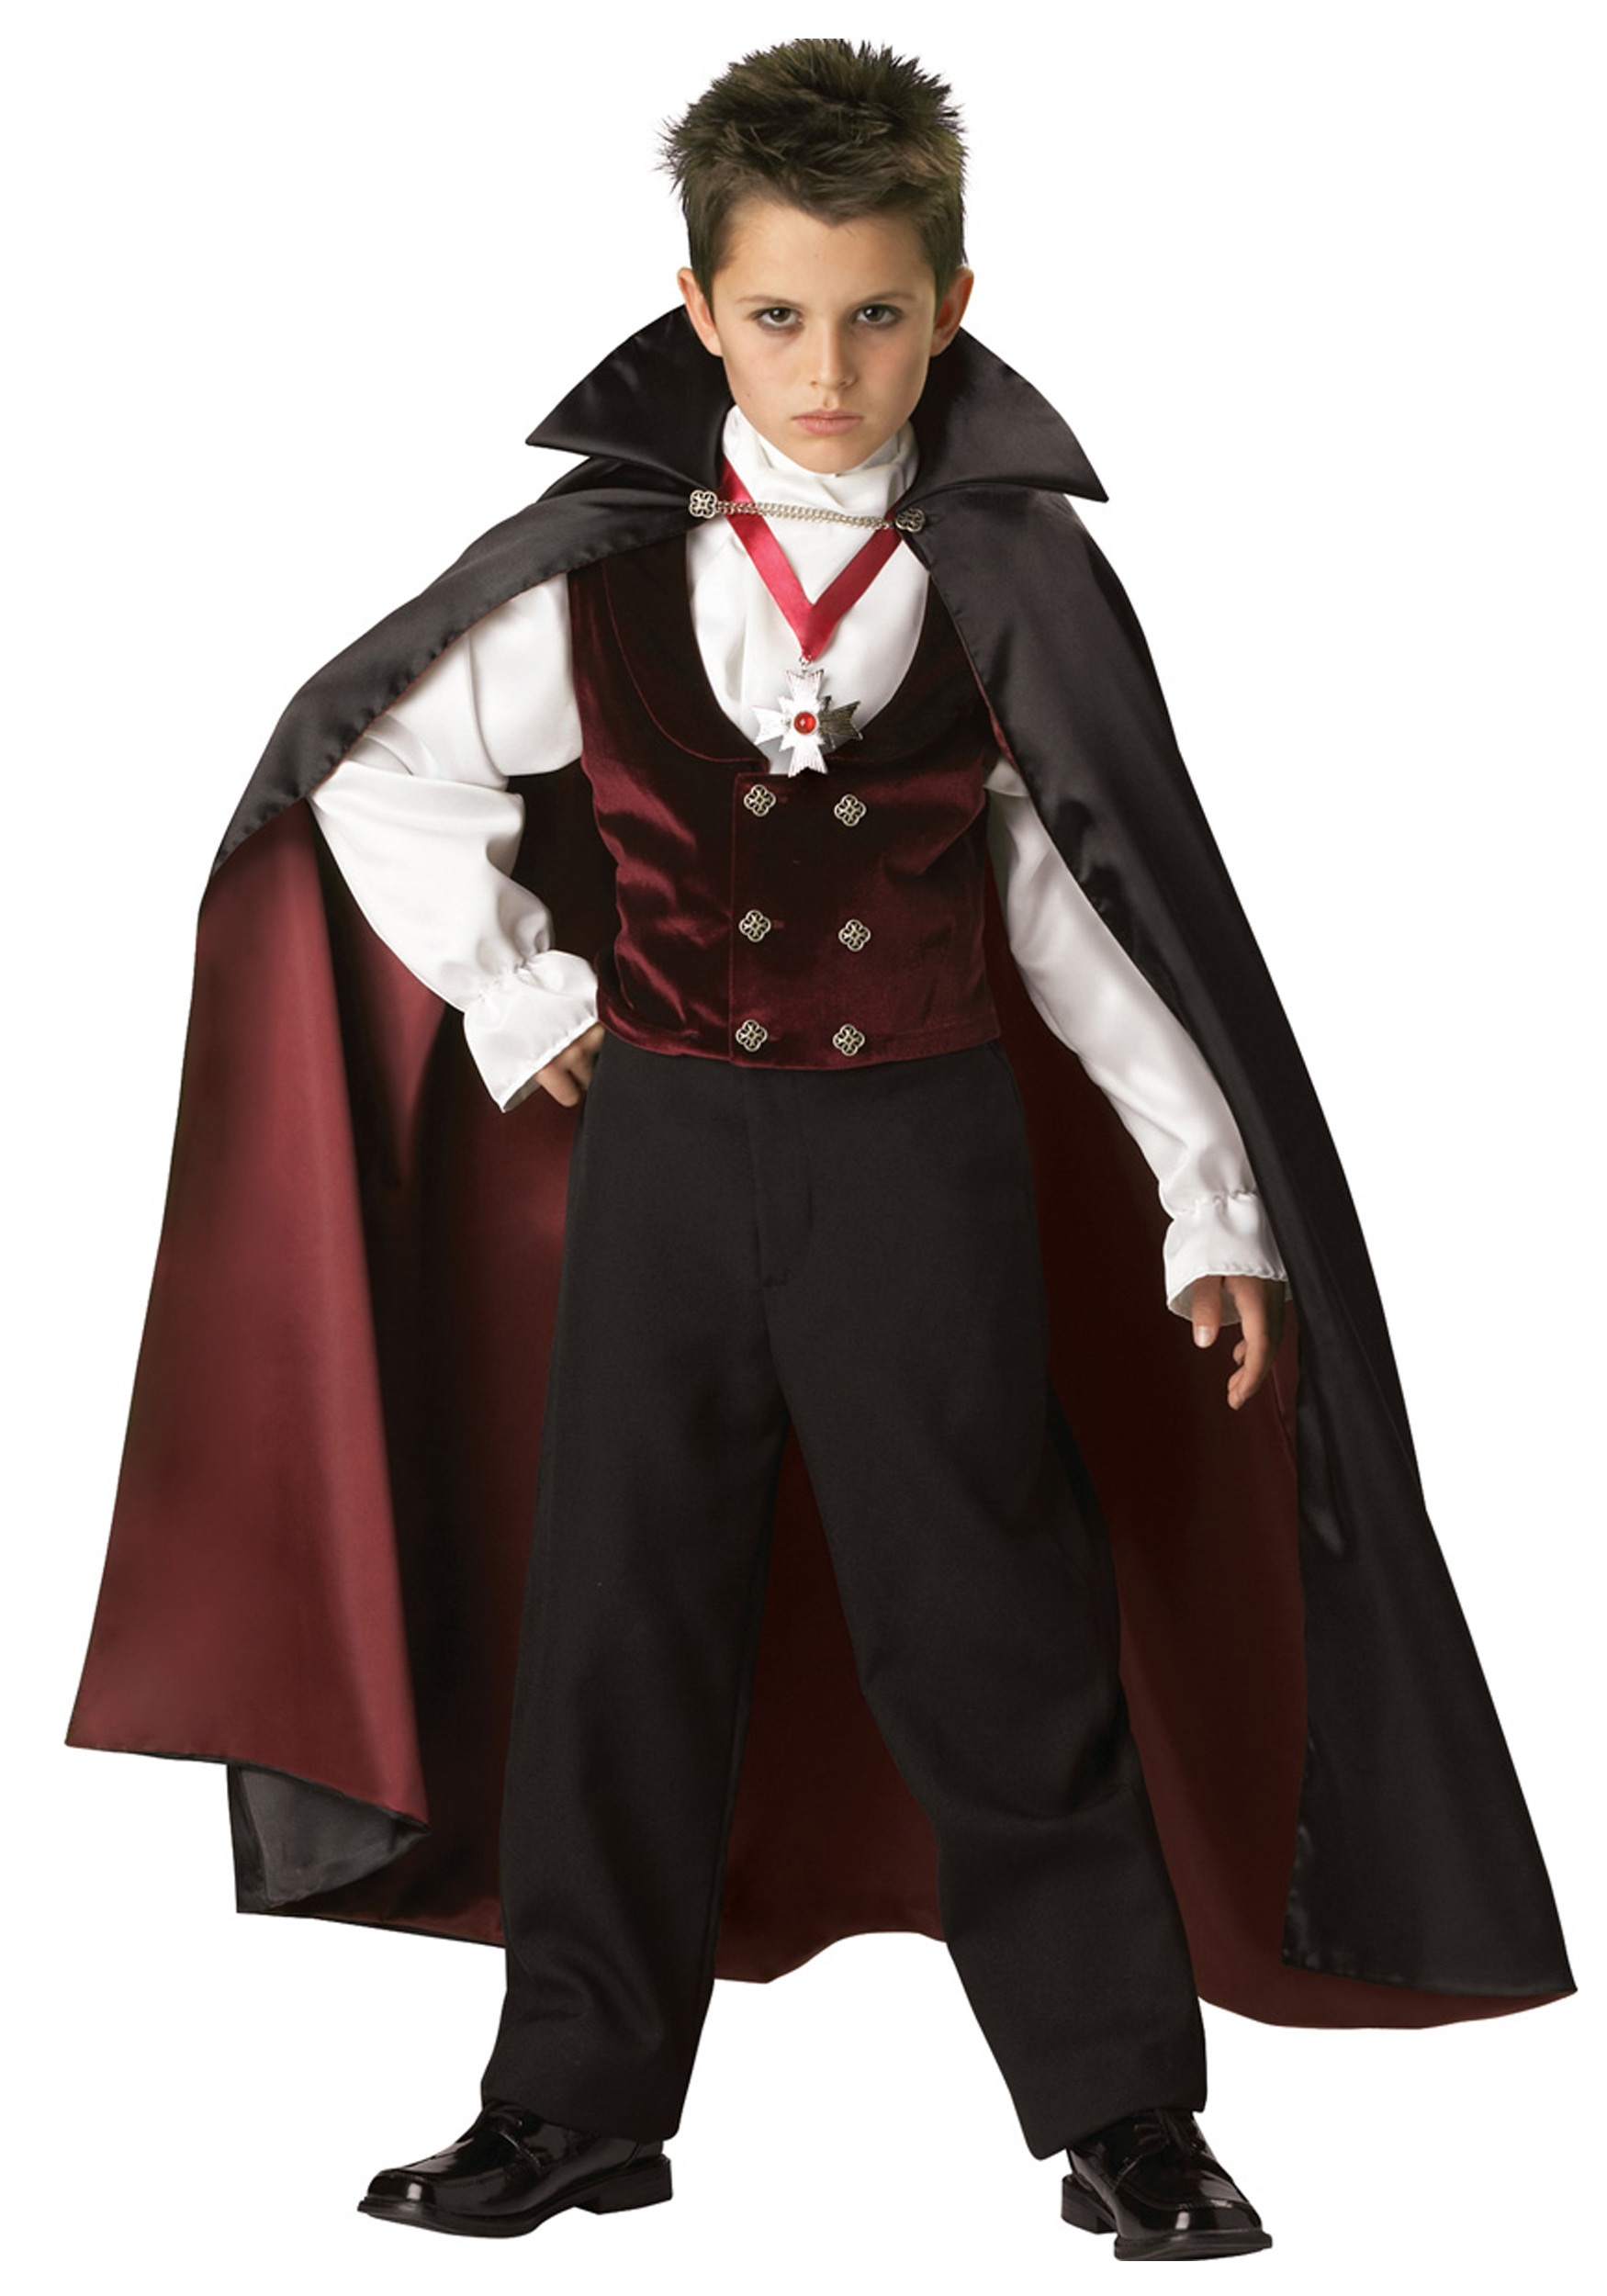 Teen Dark Gothic Vampire Boys Halloween Party Fancy Dress Childs Costume Outfit 